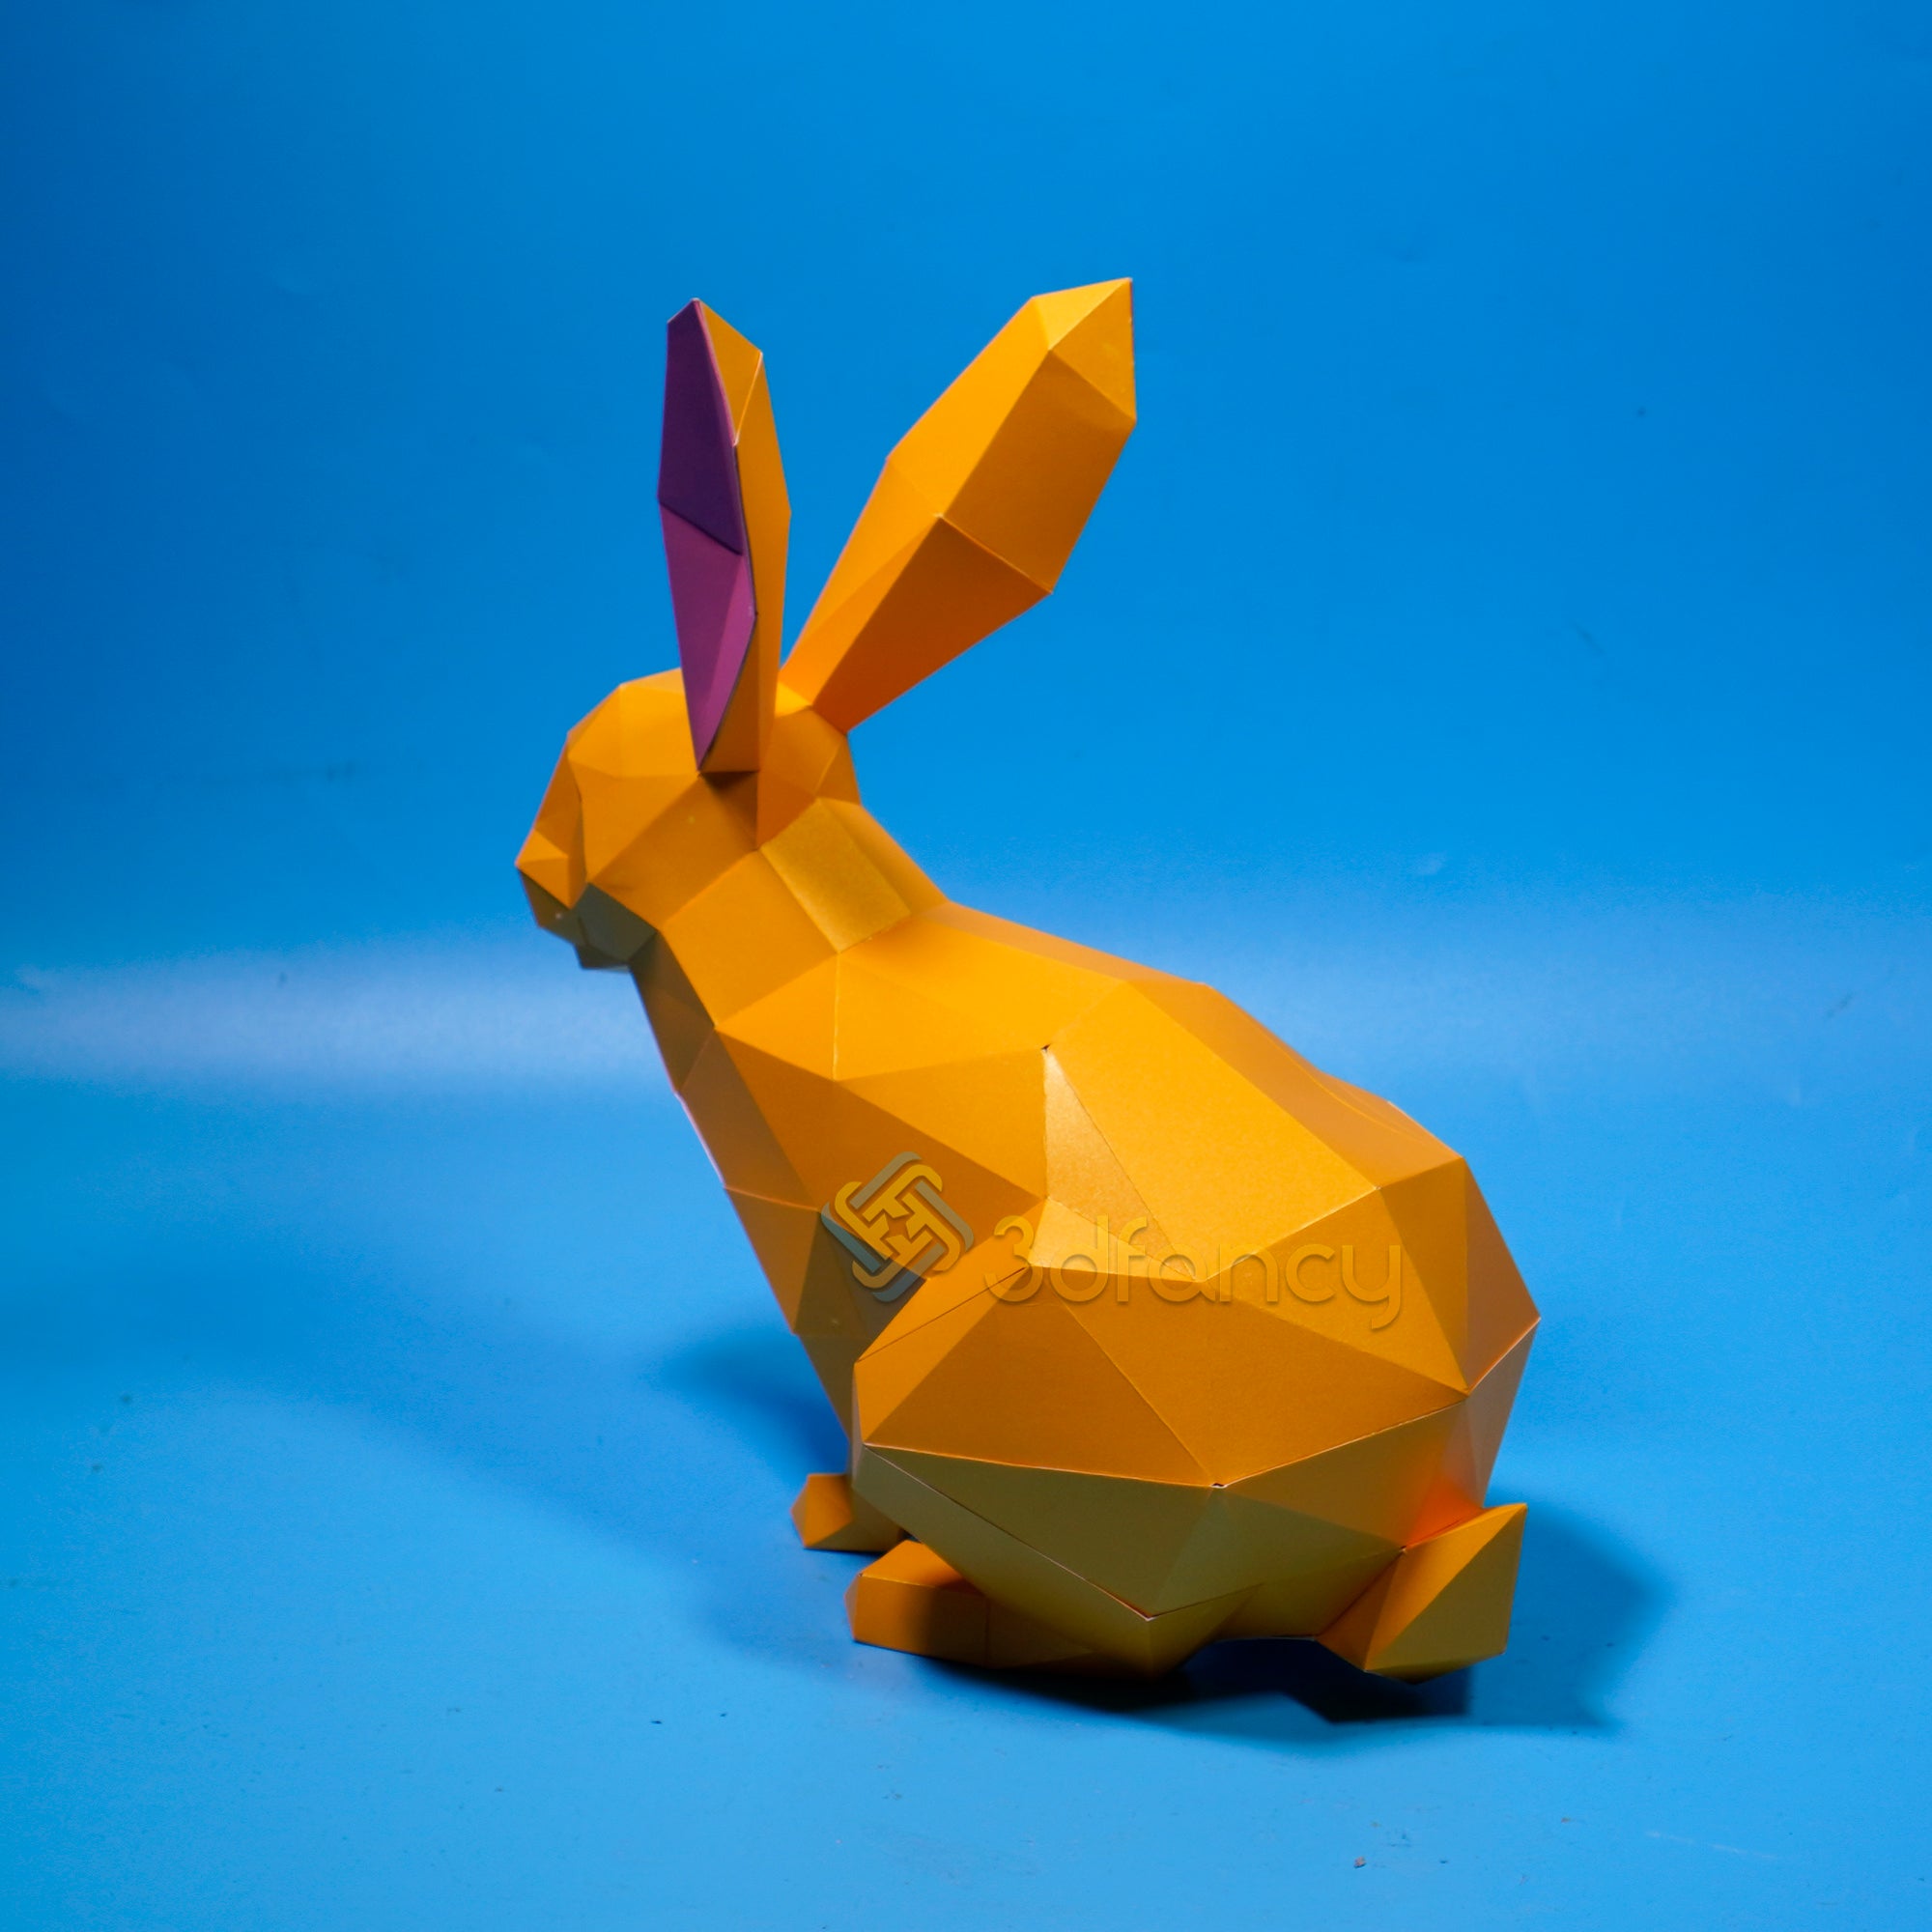 Low poly Rabbit Papercraft PDF, SVG Template For Creating 3D Rabbit V1, 3D Rabbit For Easter Decor